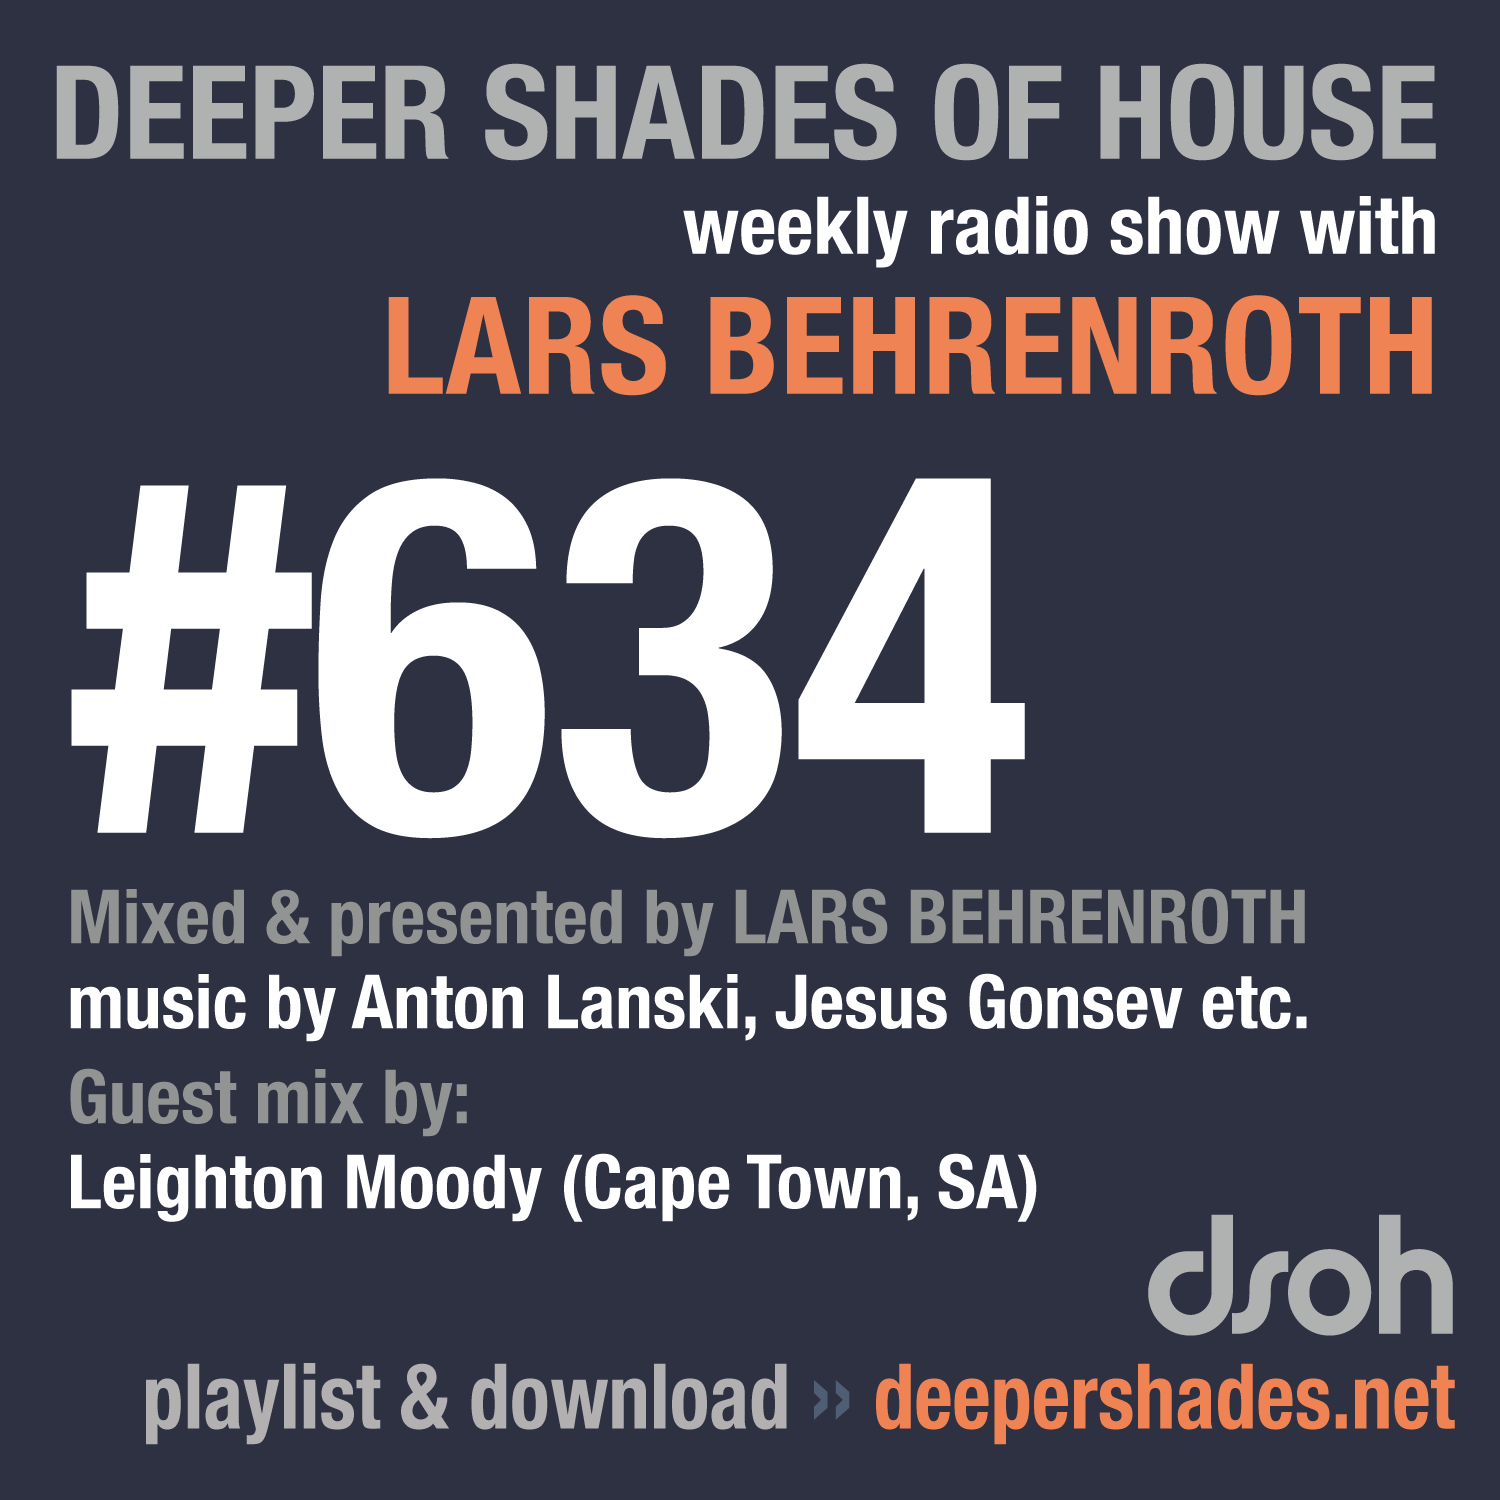 Deeper Shades Of House 634